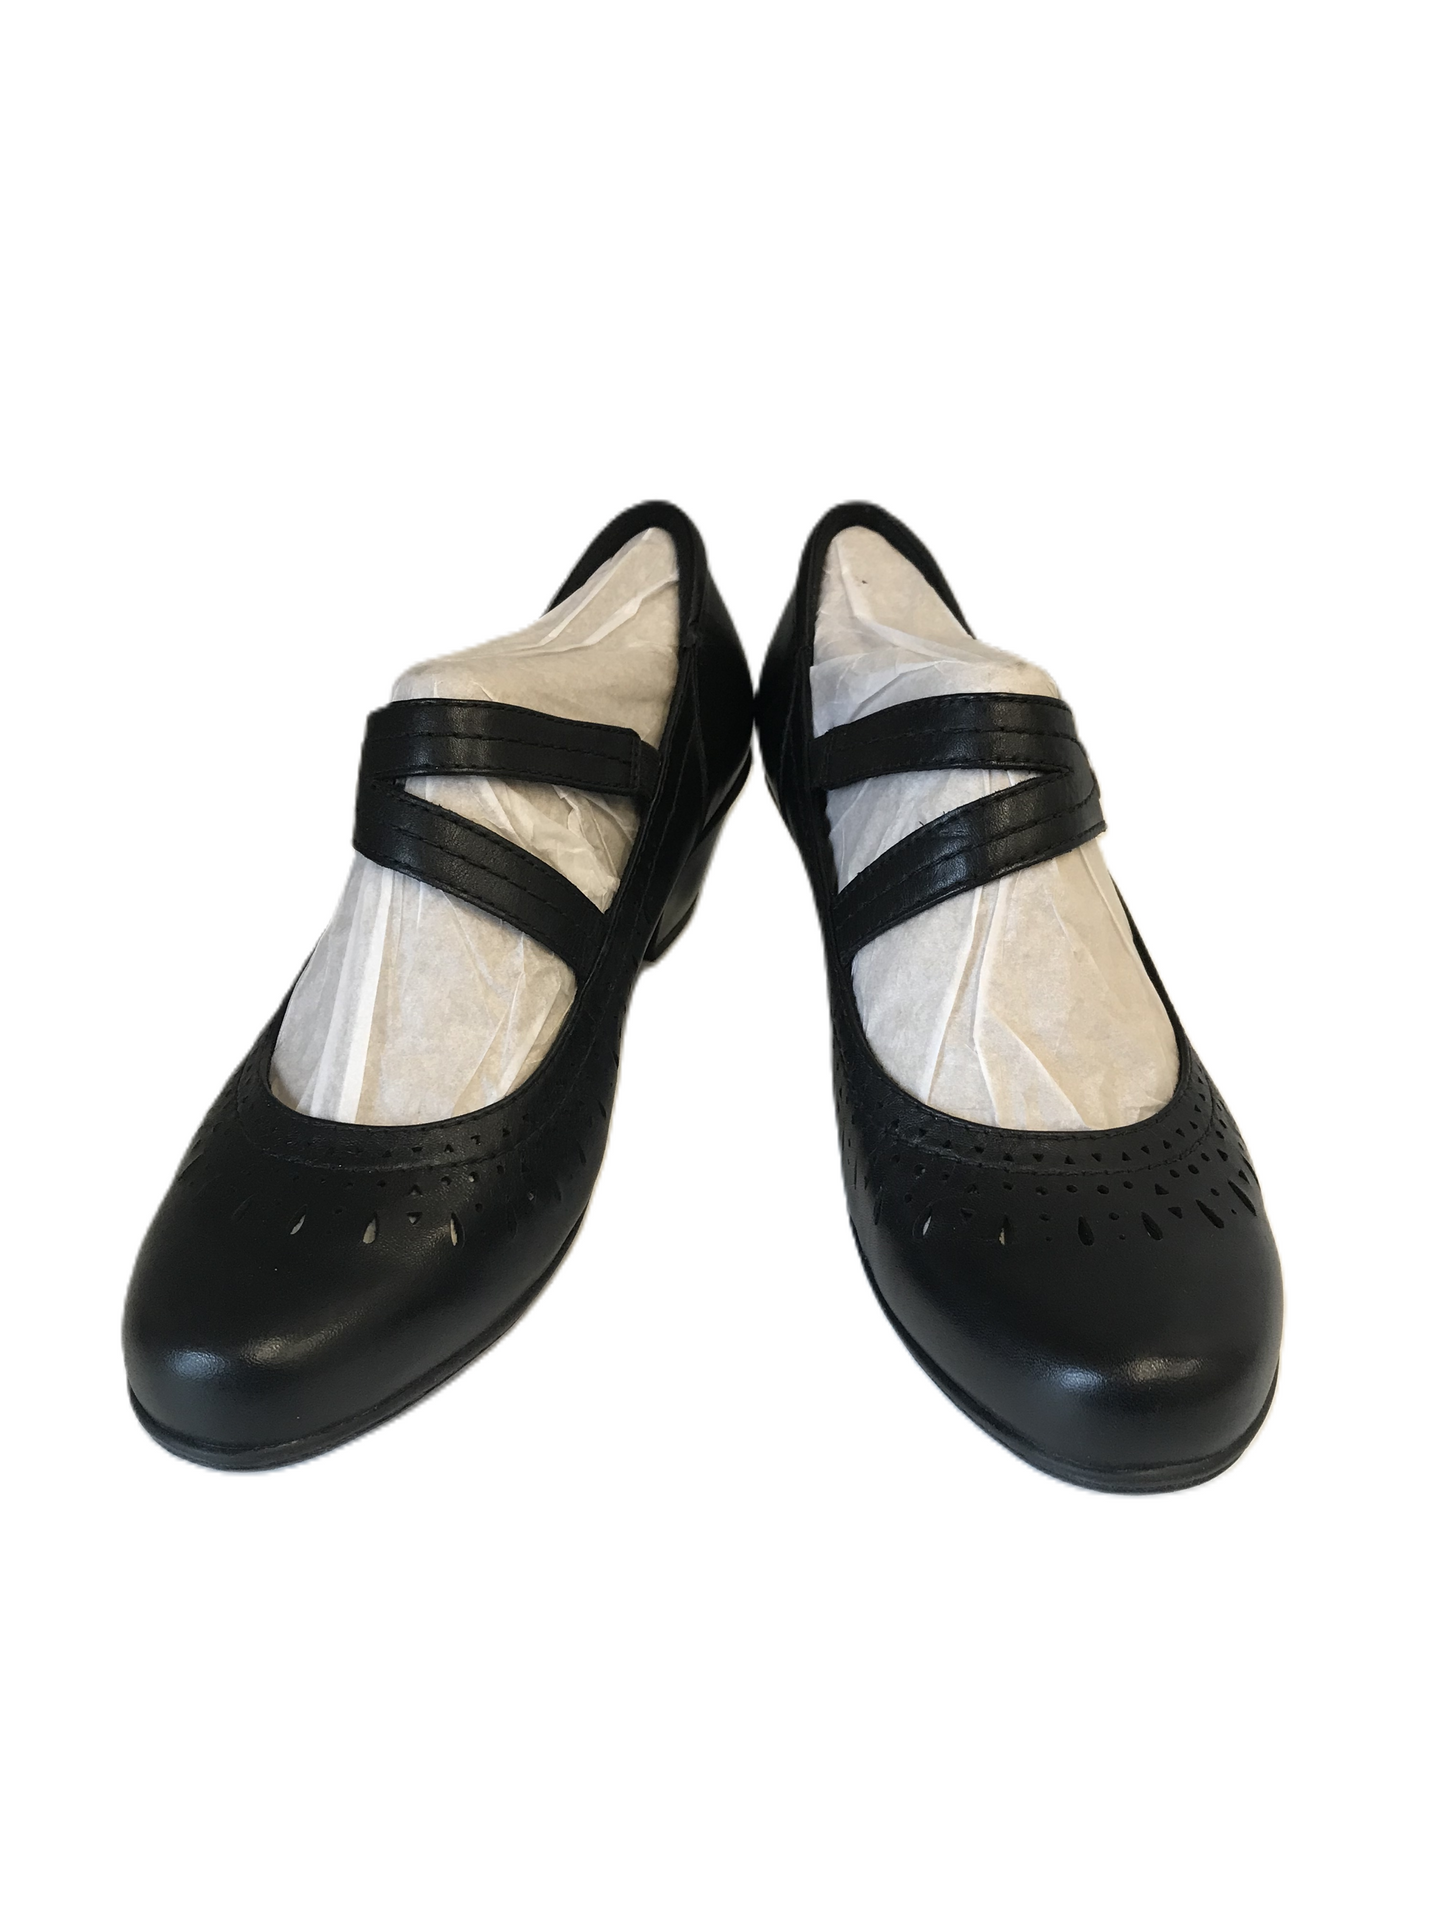 Black Shoes Flats By Earth, Size: 9.5